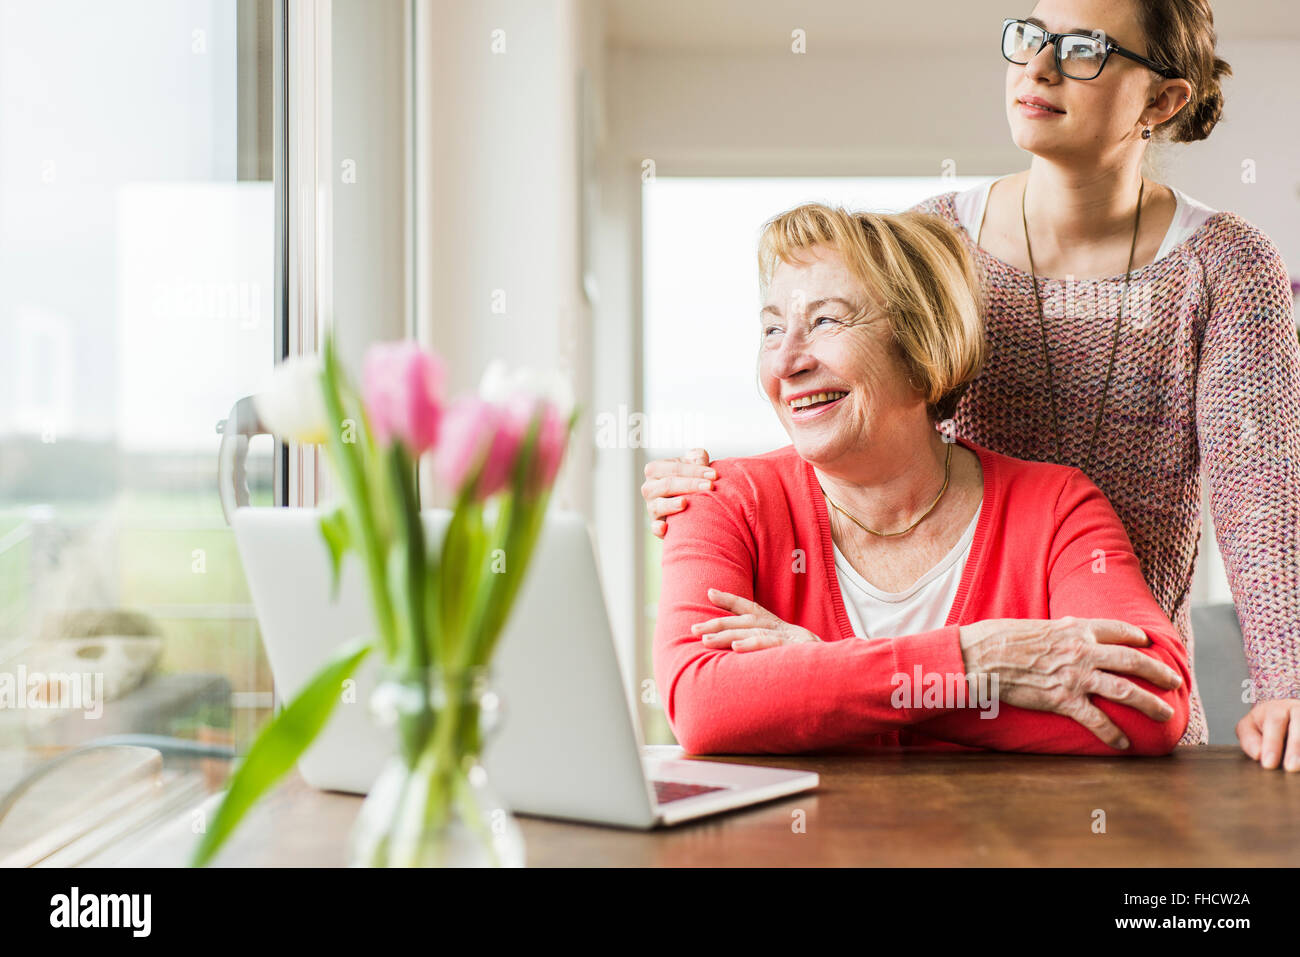 Smiling young woman with senior woman at table with laptop looking out of window Stock Photo